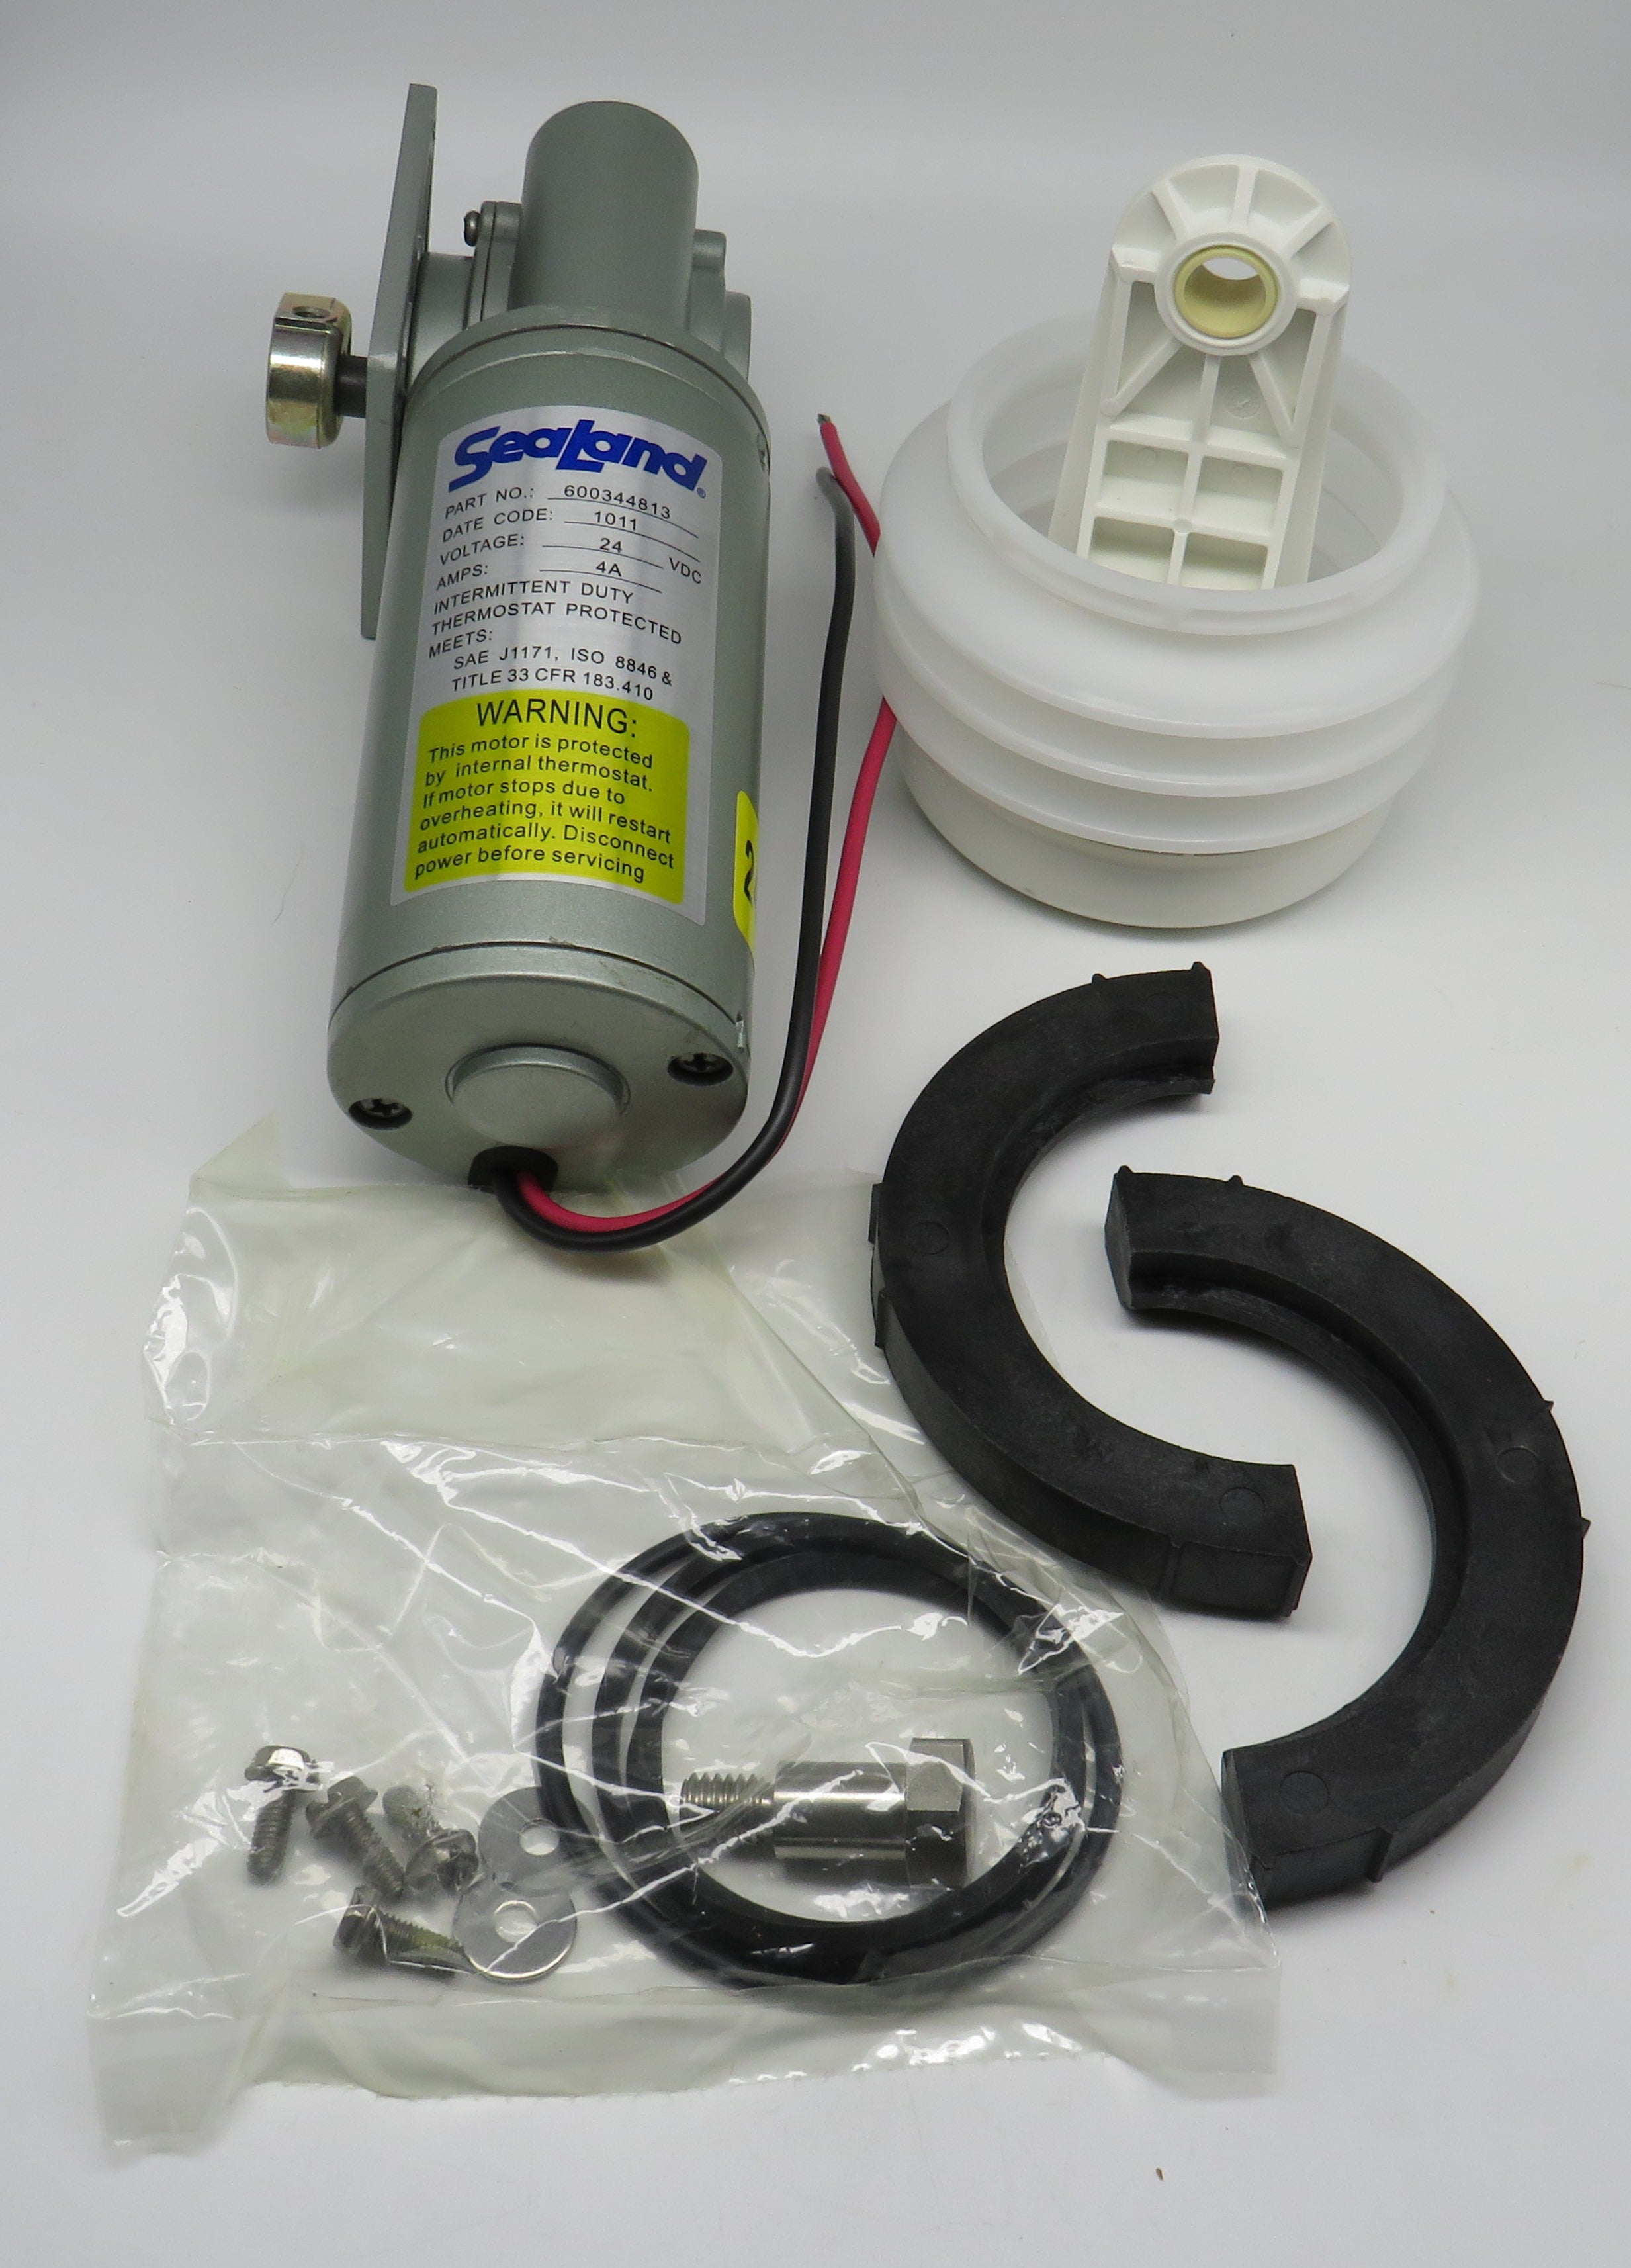 385311424 Sealand Dometic (Replaces 310246) S/T 24V Pump Motor Kit